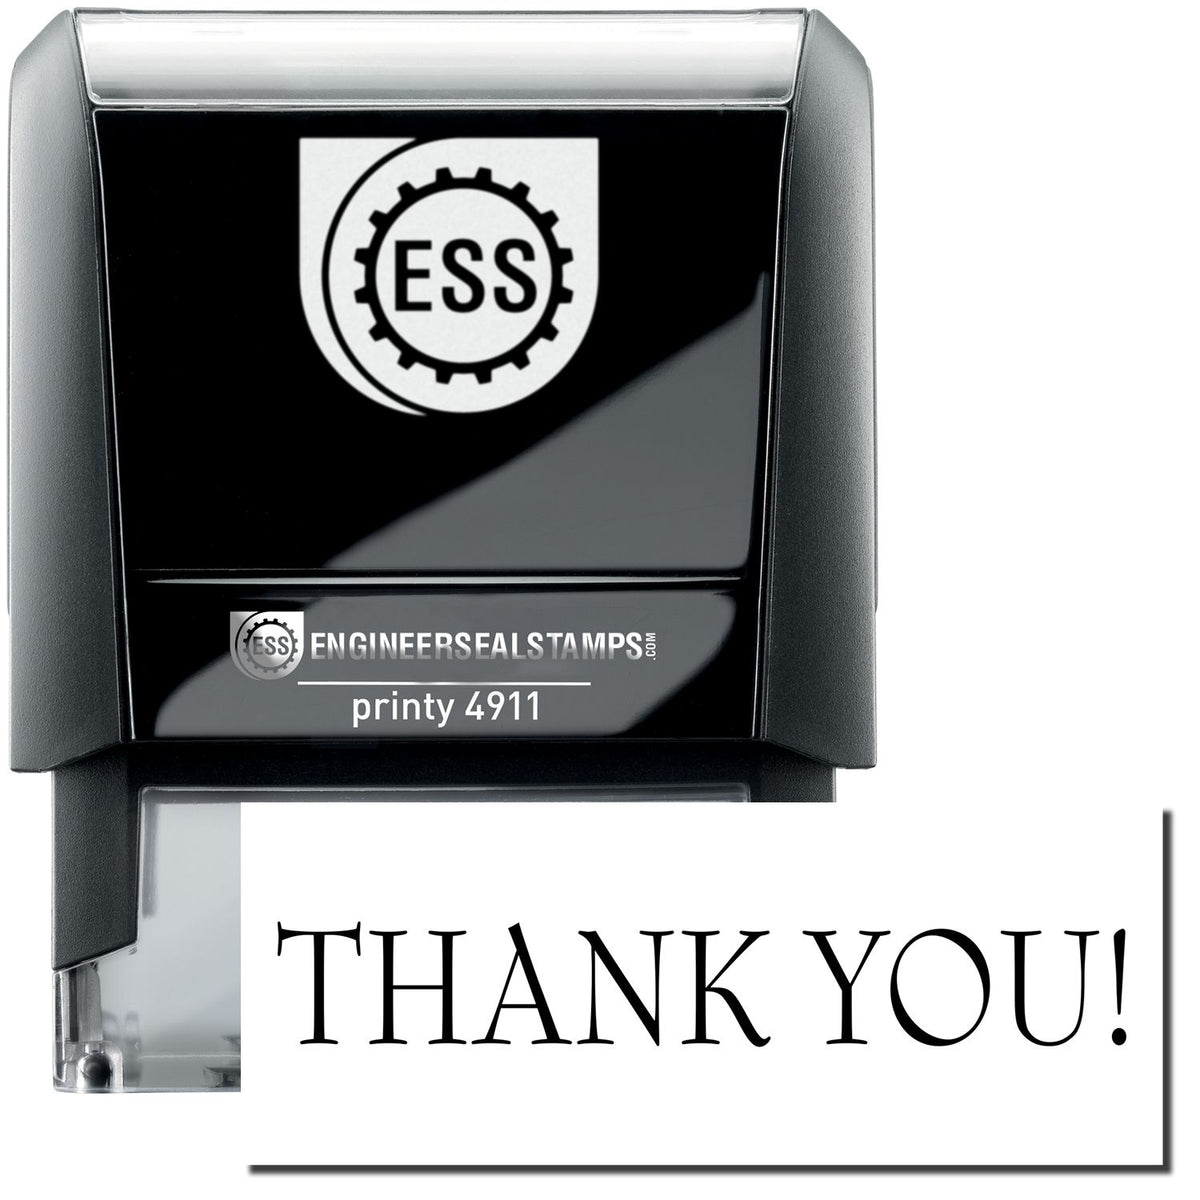 A self-inking stamp with a stamped image showing how the text &quot;THANK YOU!&quot; is displayed after stamping.